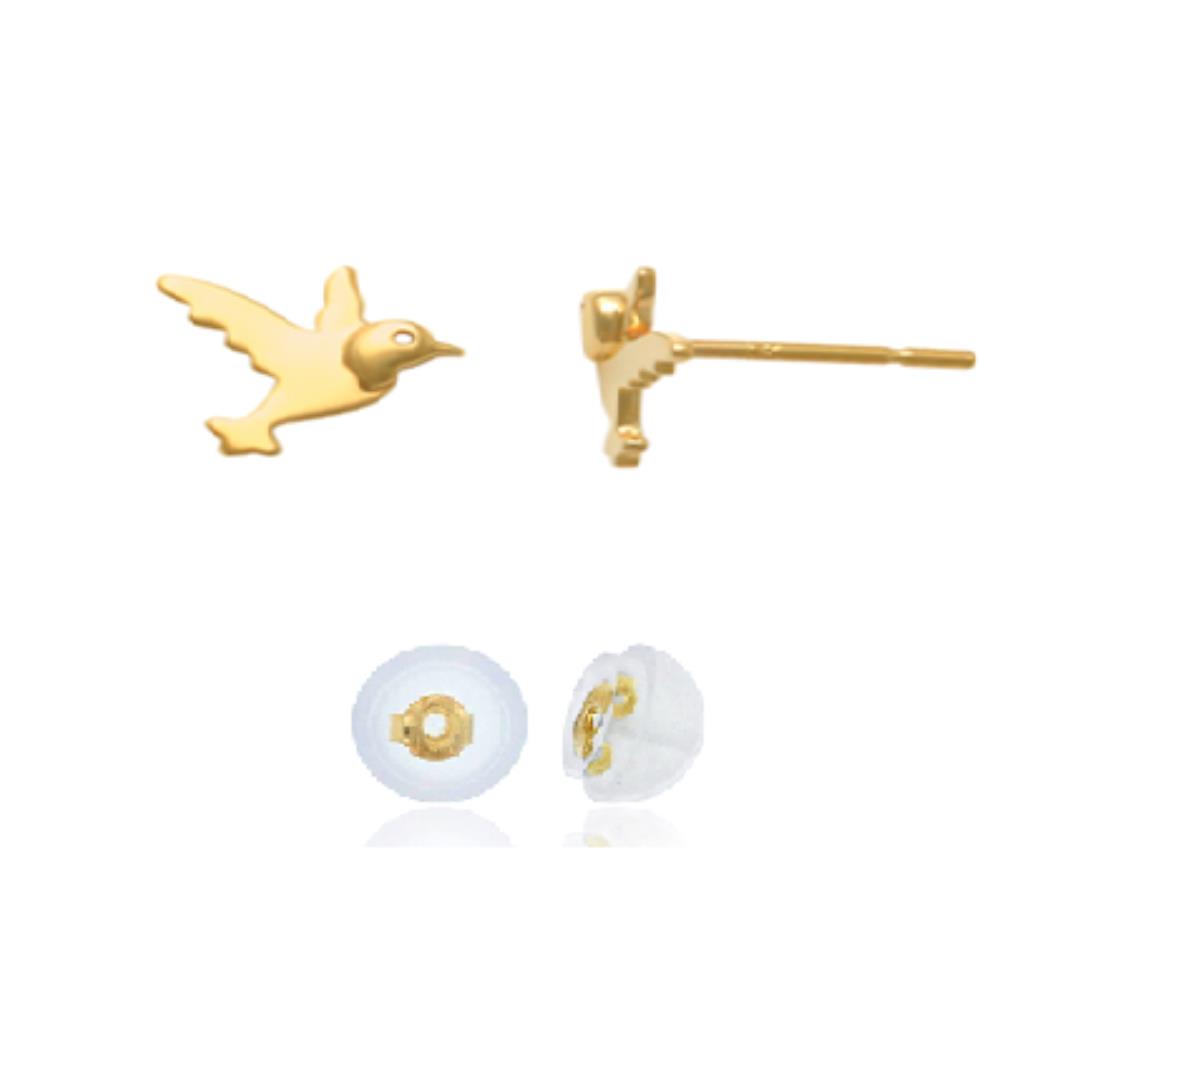 10K Yellow Gold 6x6mm Polished Flying Bird Stud Earring with Silicone Back